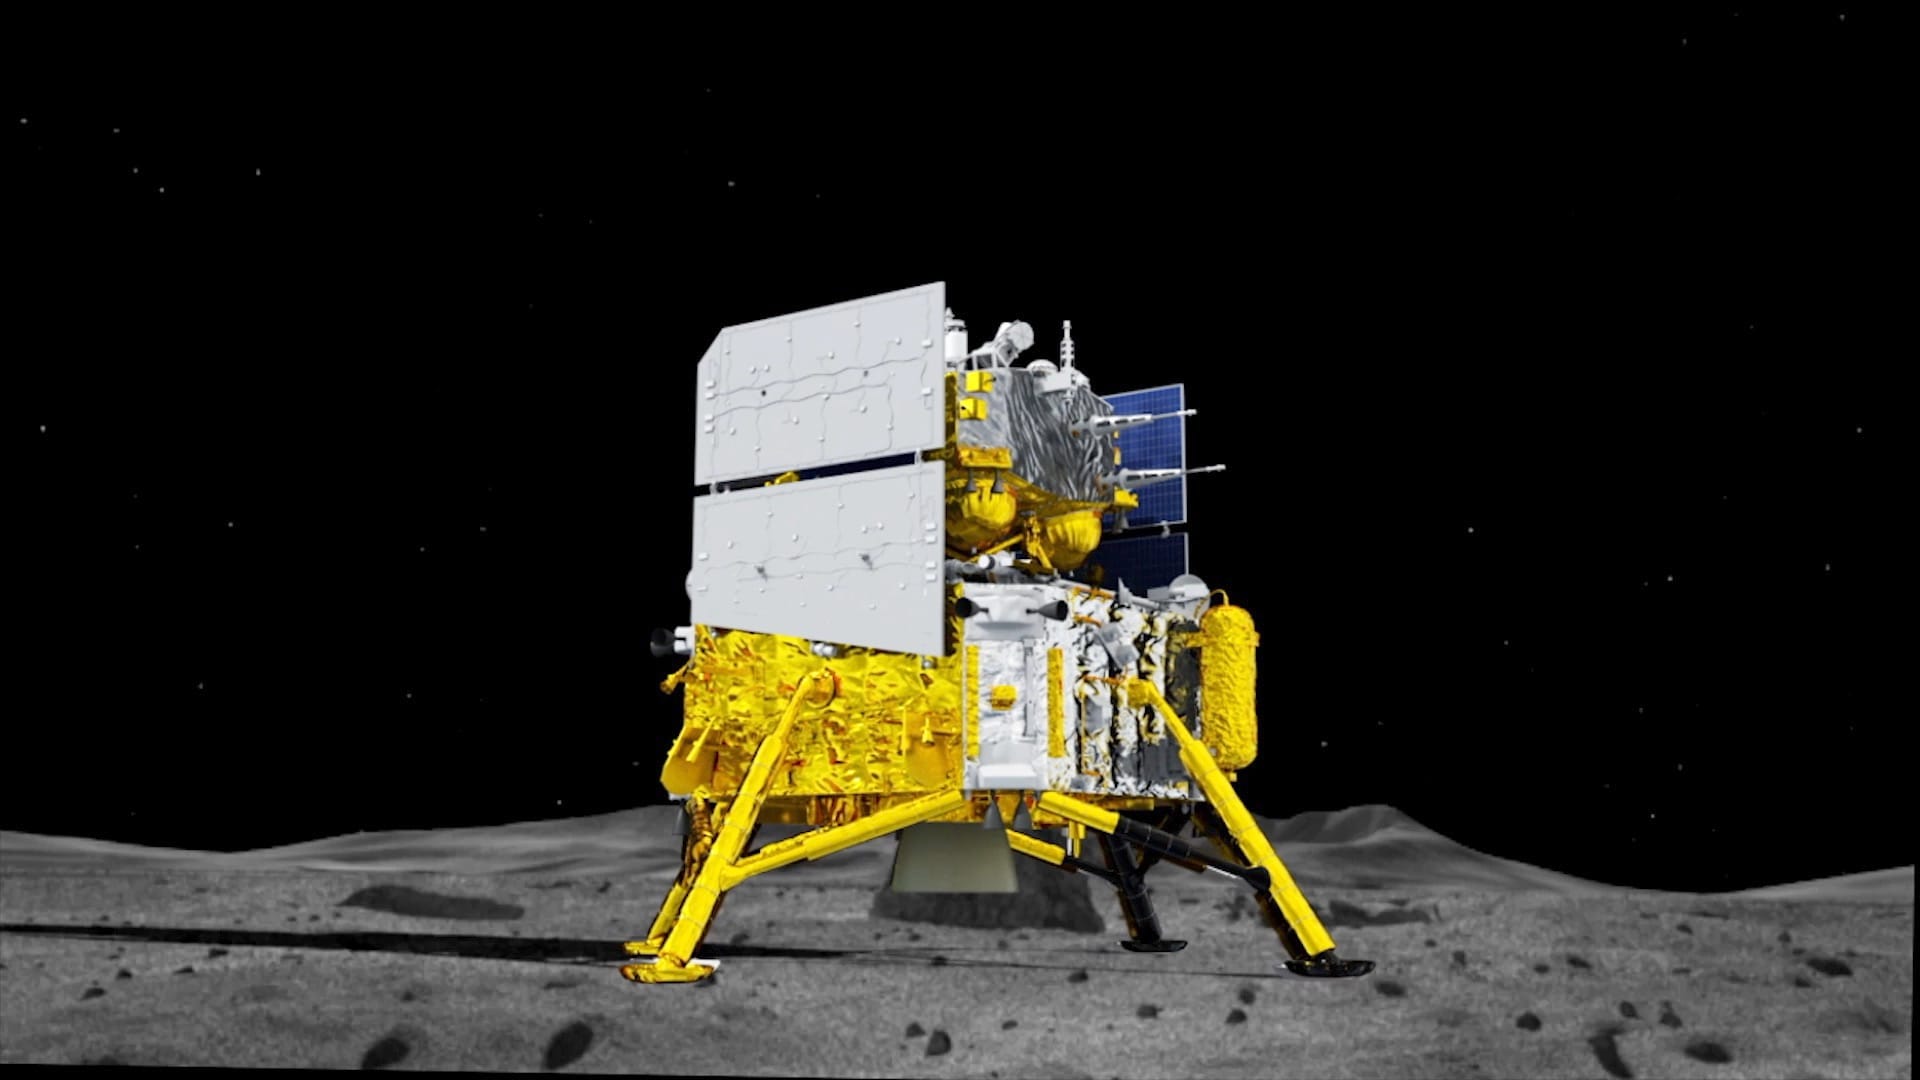 A render of the Chang'e 6 spacecraft on the lunar surface.